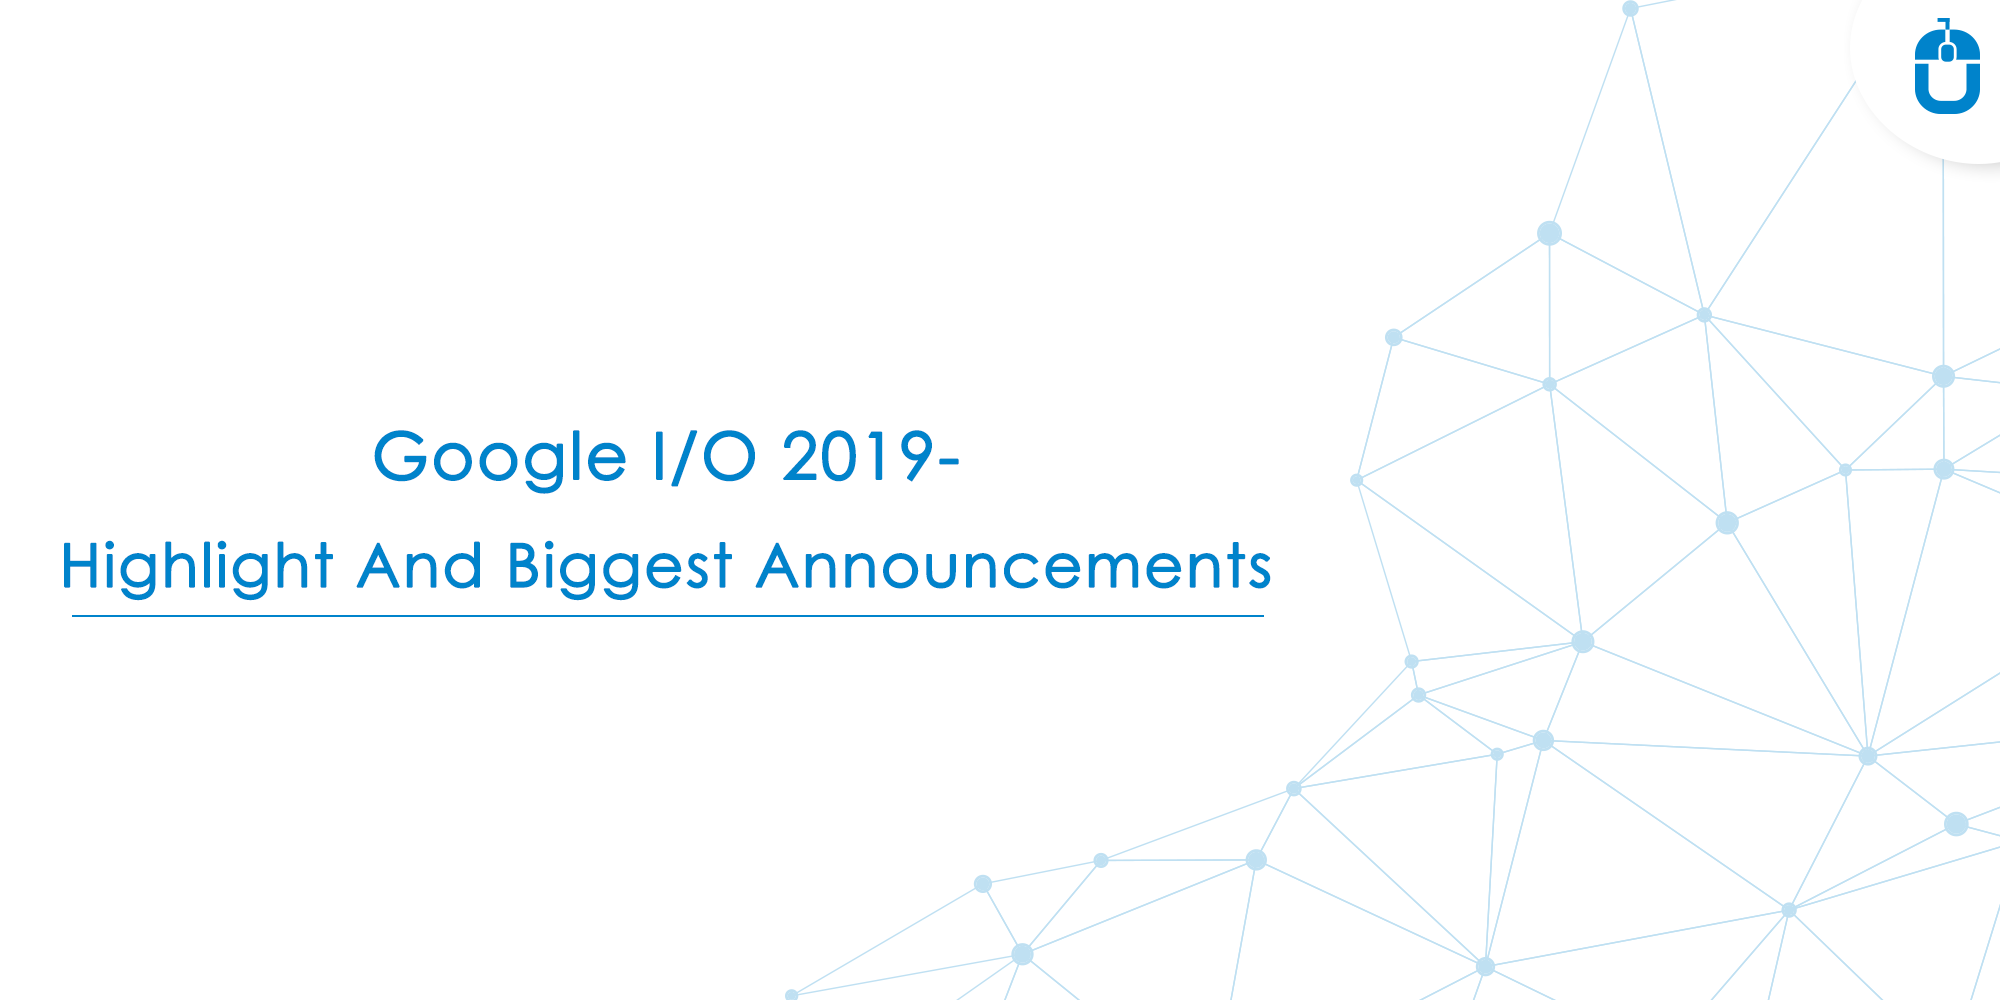 Google I/O 2019 – Highlight And Biggest Announcements